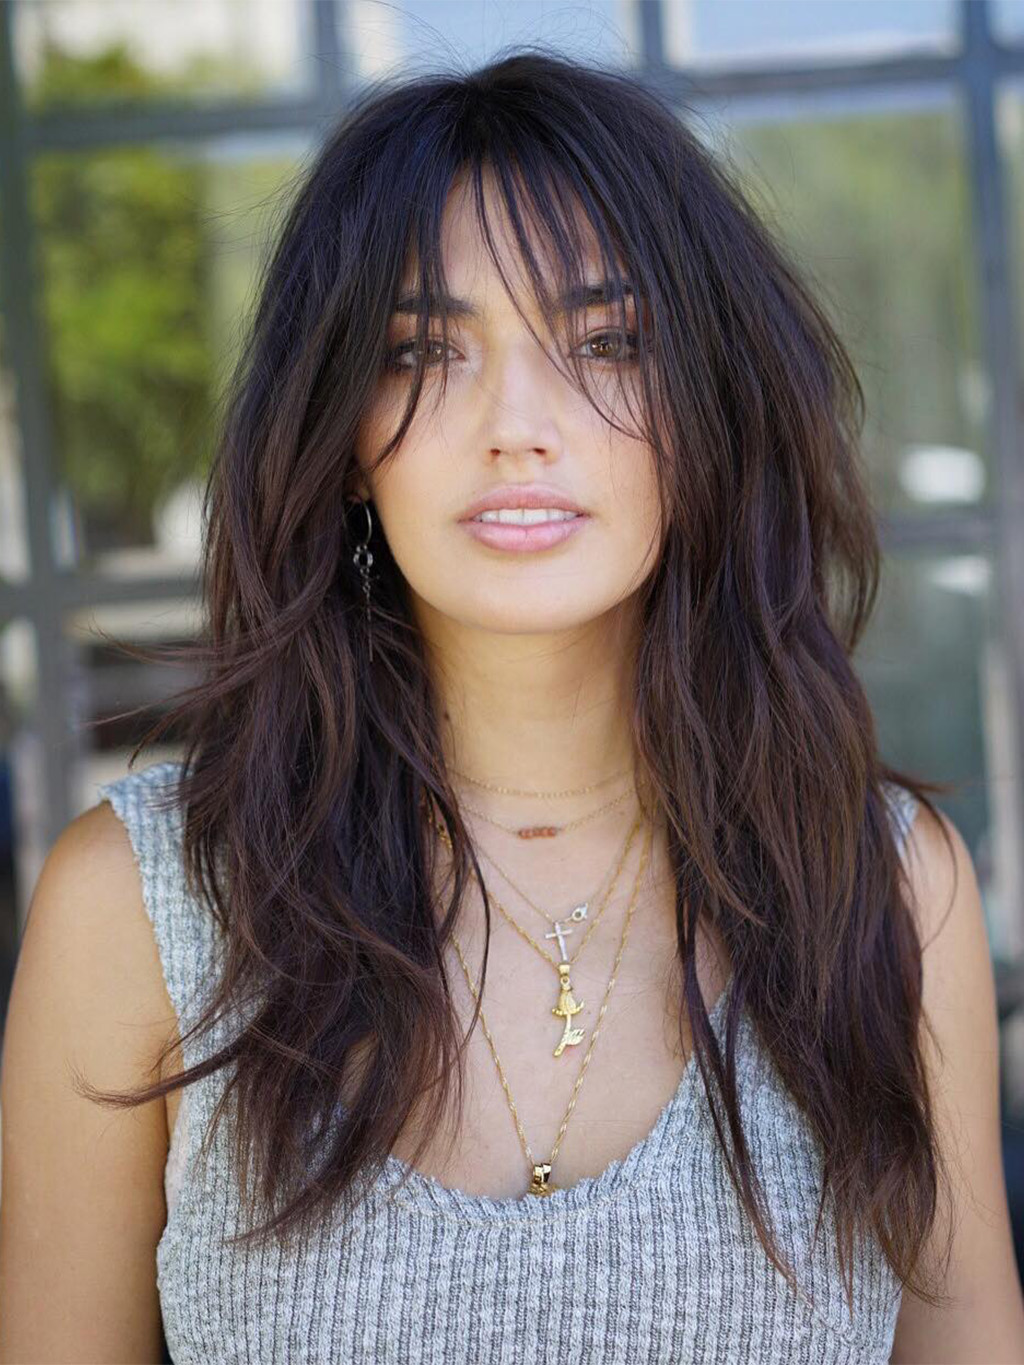 22 Examples of Brown Hair With Highlights That Are So Chic | Who What Wear